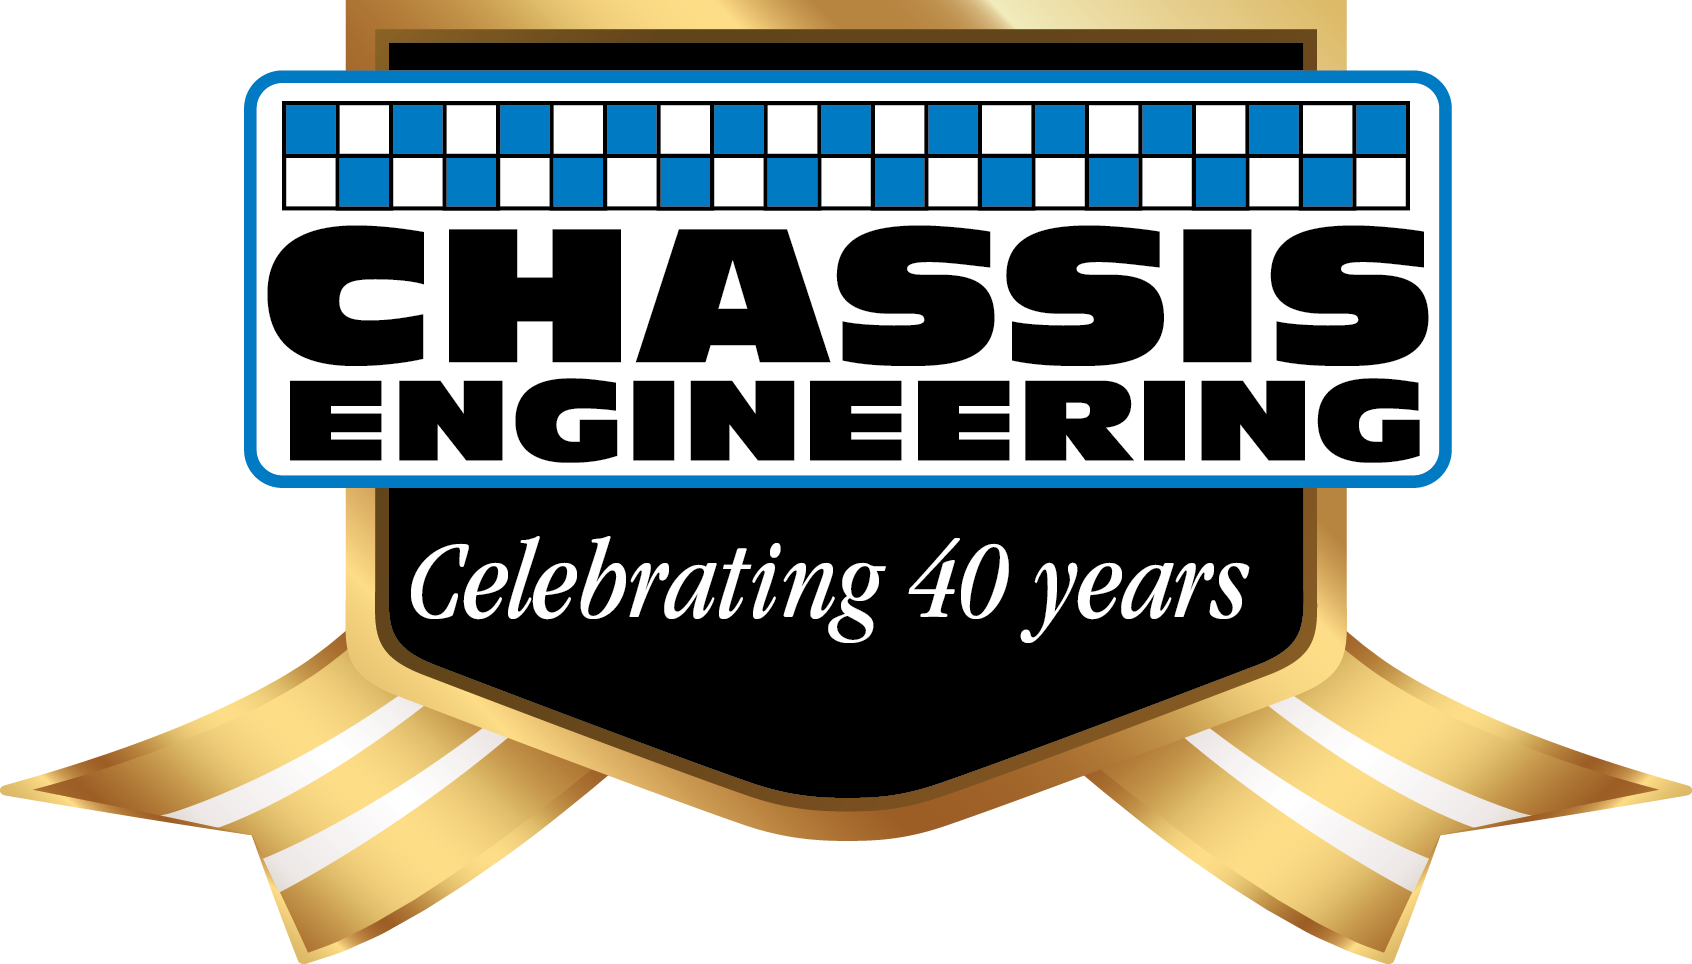 CHASSIS ENGINEERING